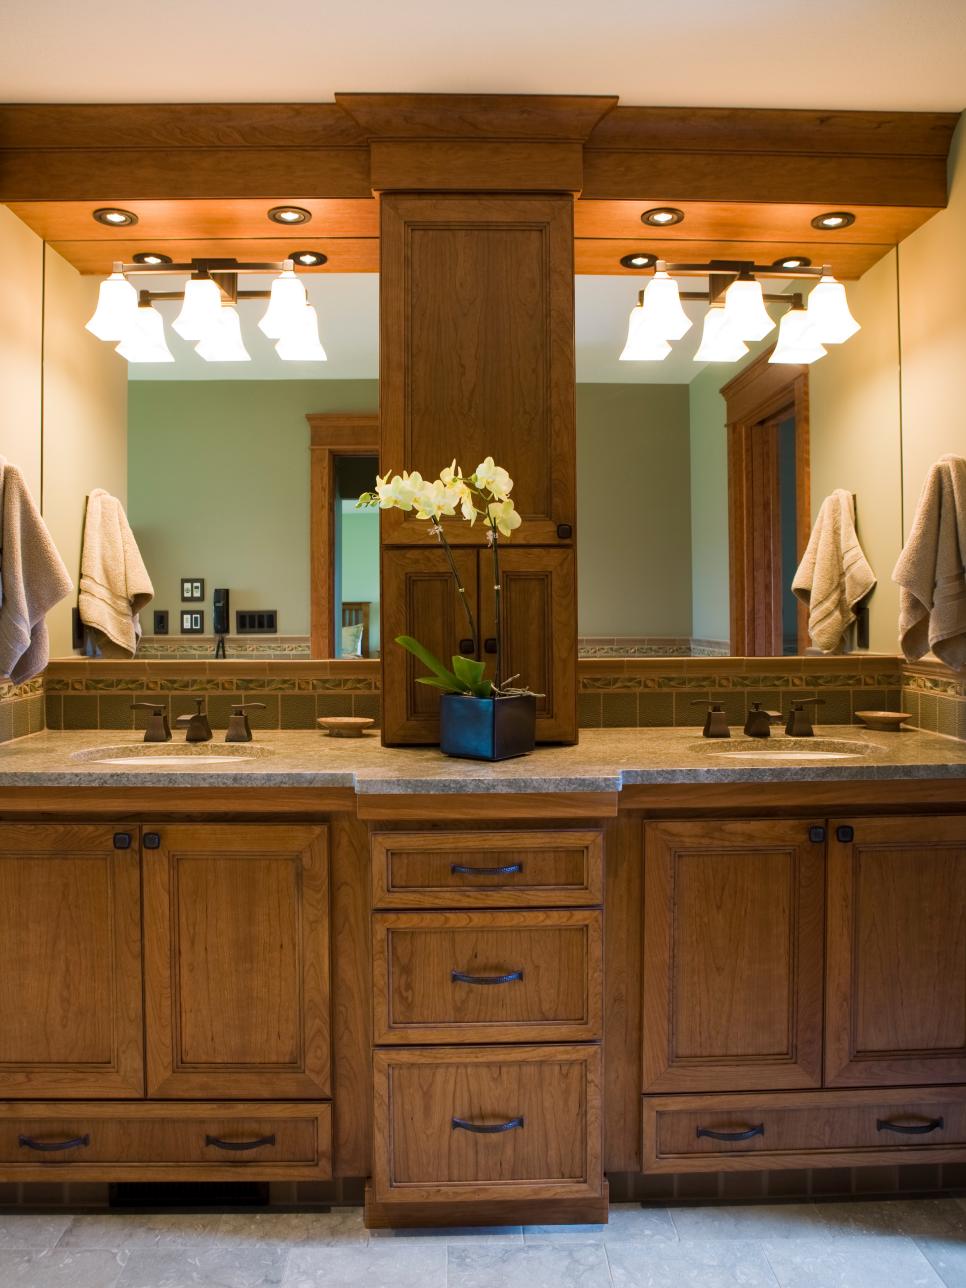 Transitional Double Vanity Bathroom With Stone Countertops